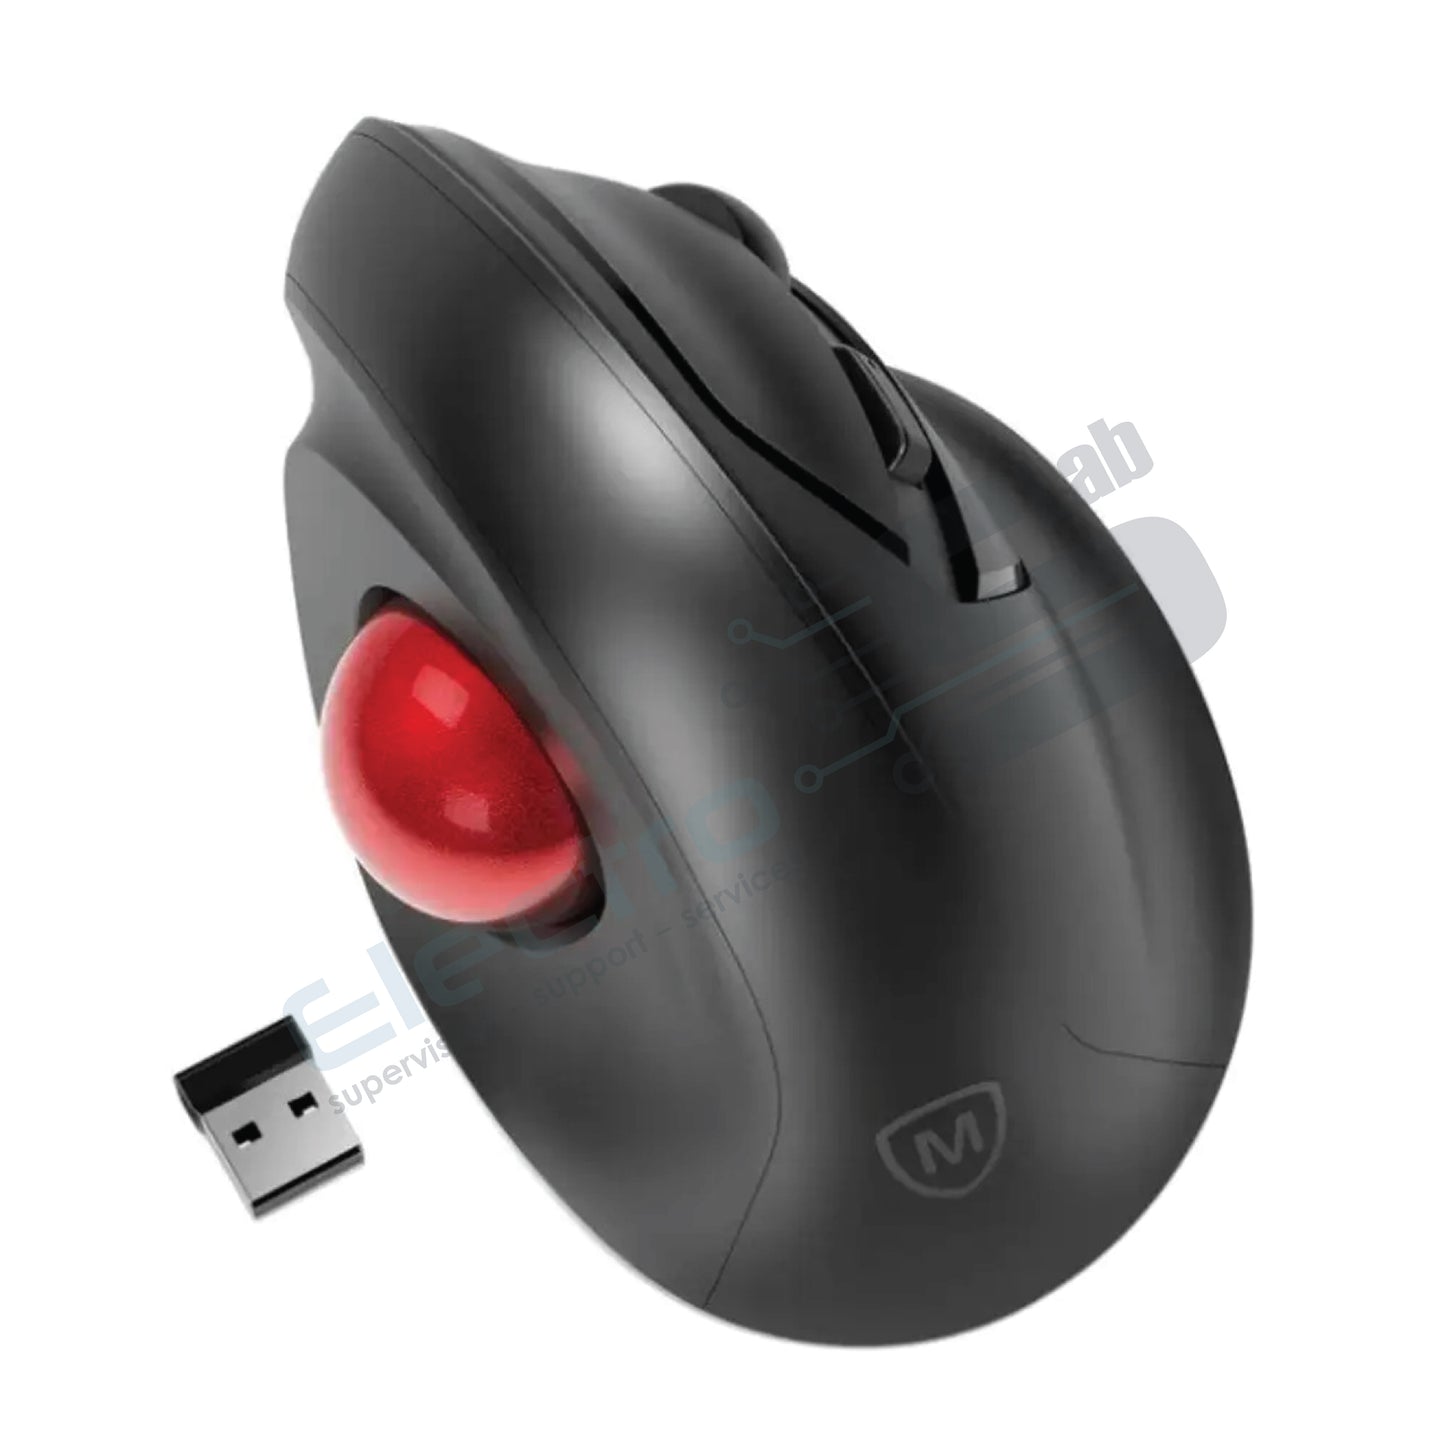 MOUSE WIRELESS USB MICROPACK MP-V02W BLACK